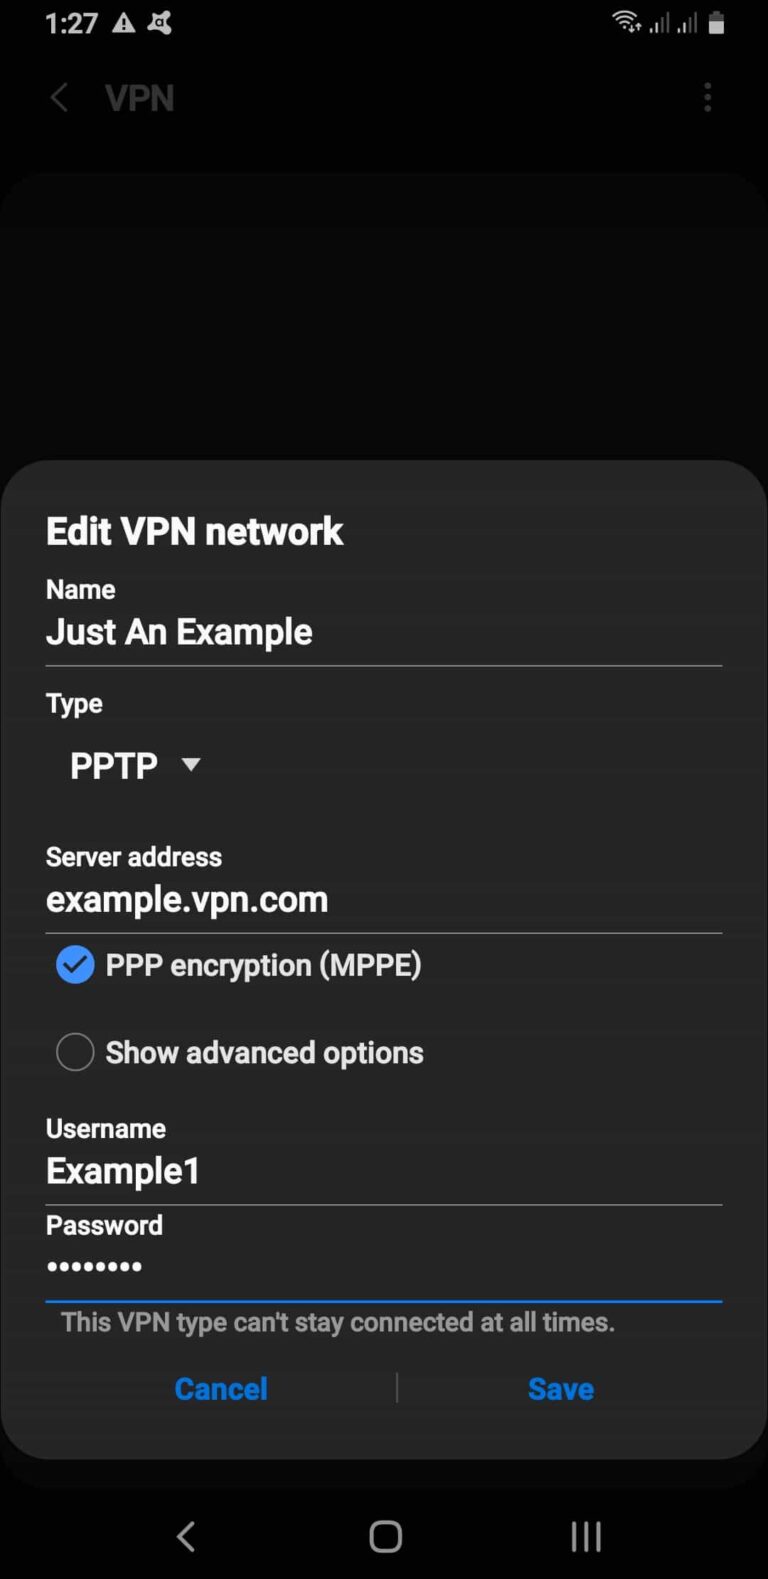 Does my phone have a built in VPN?